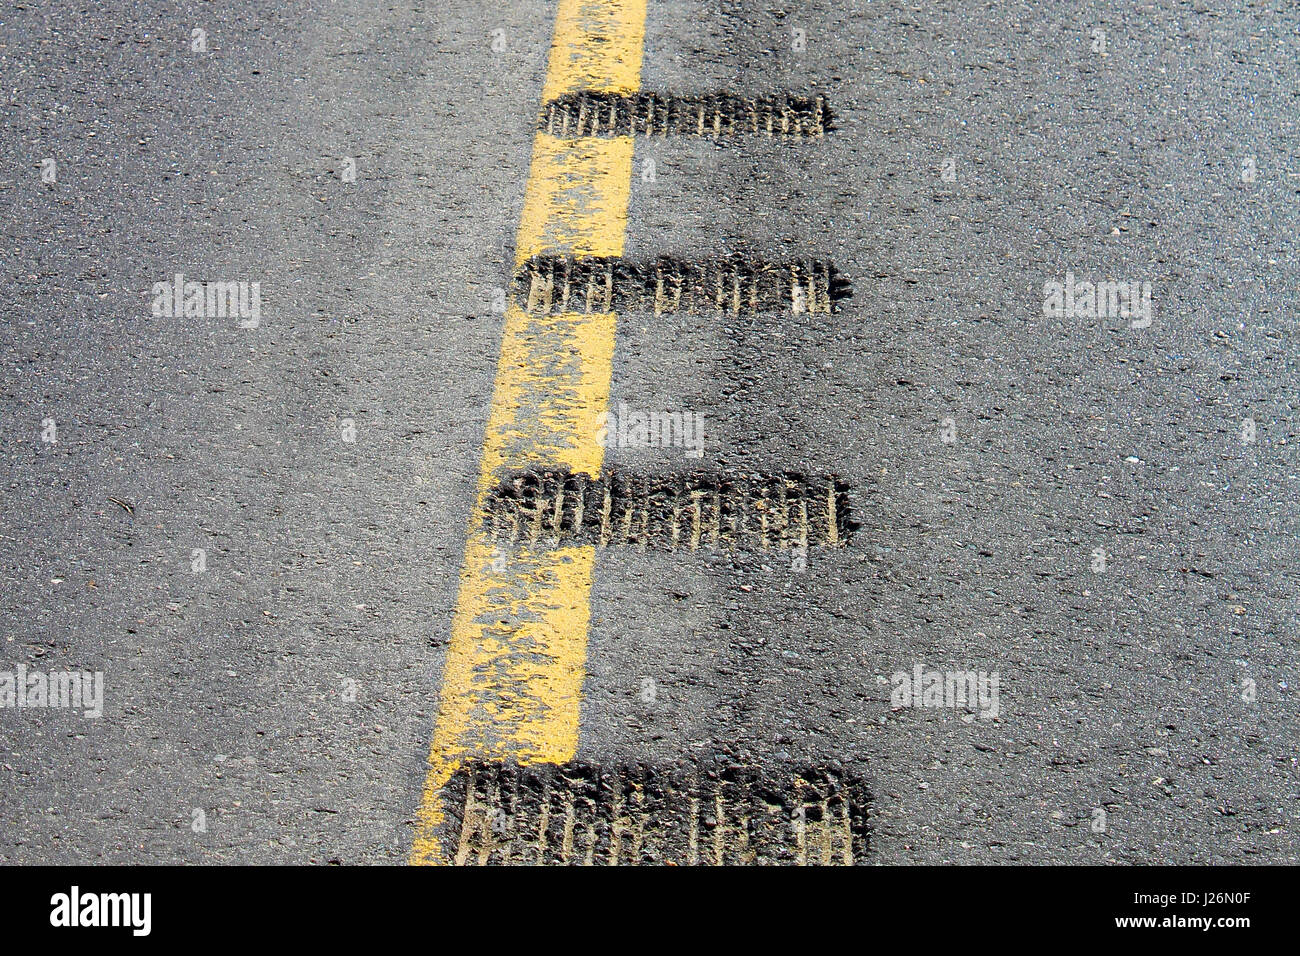 Closeup view of rumble strips on a road. Stock Photo